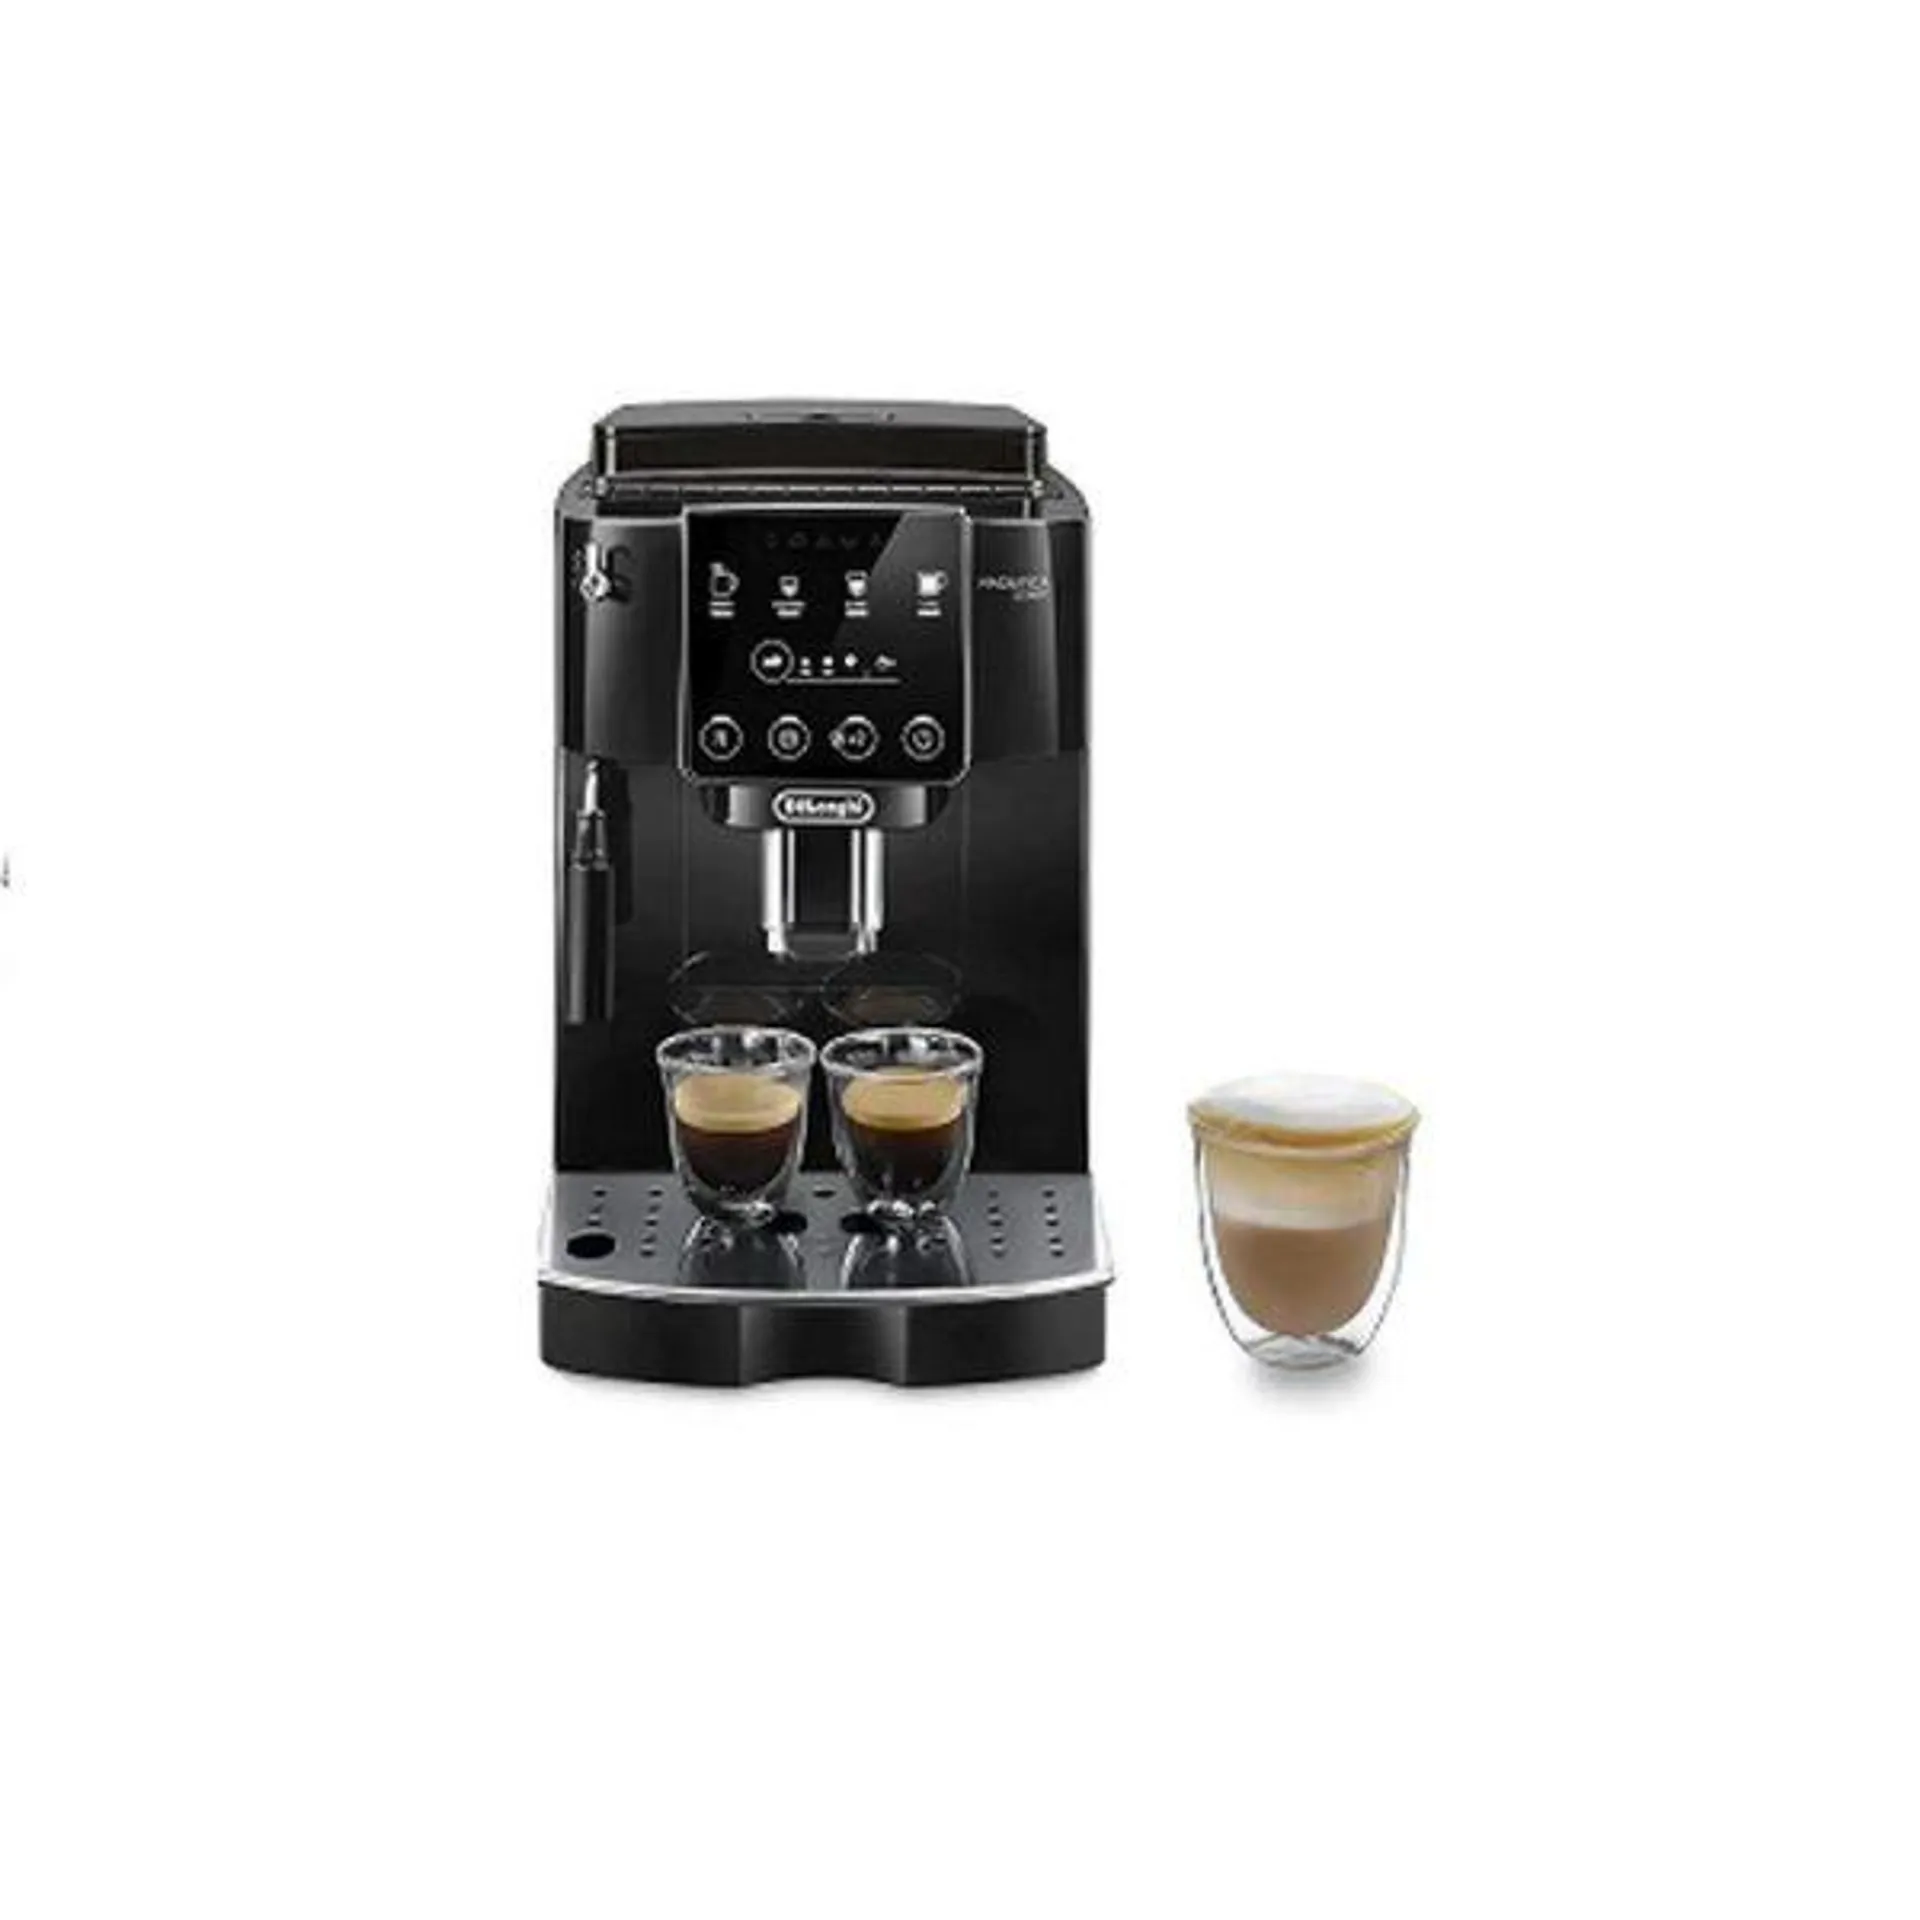 DeLonghi Bean to Cup Magnifica Automatic Coffee Maker